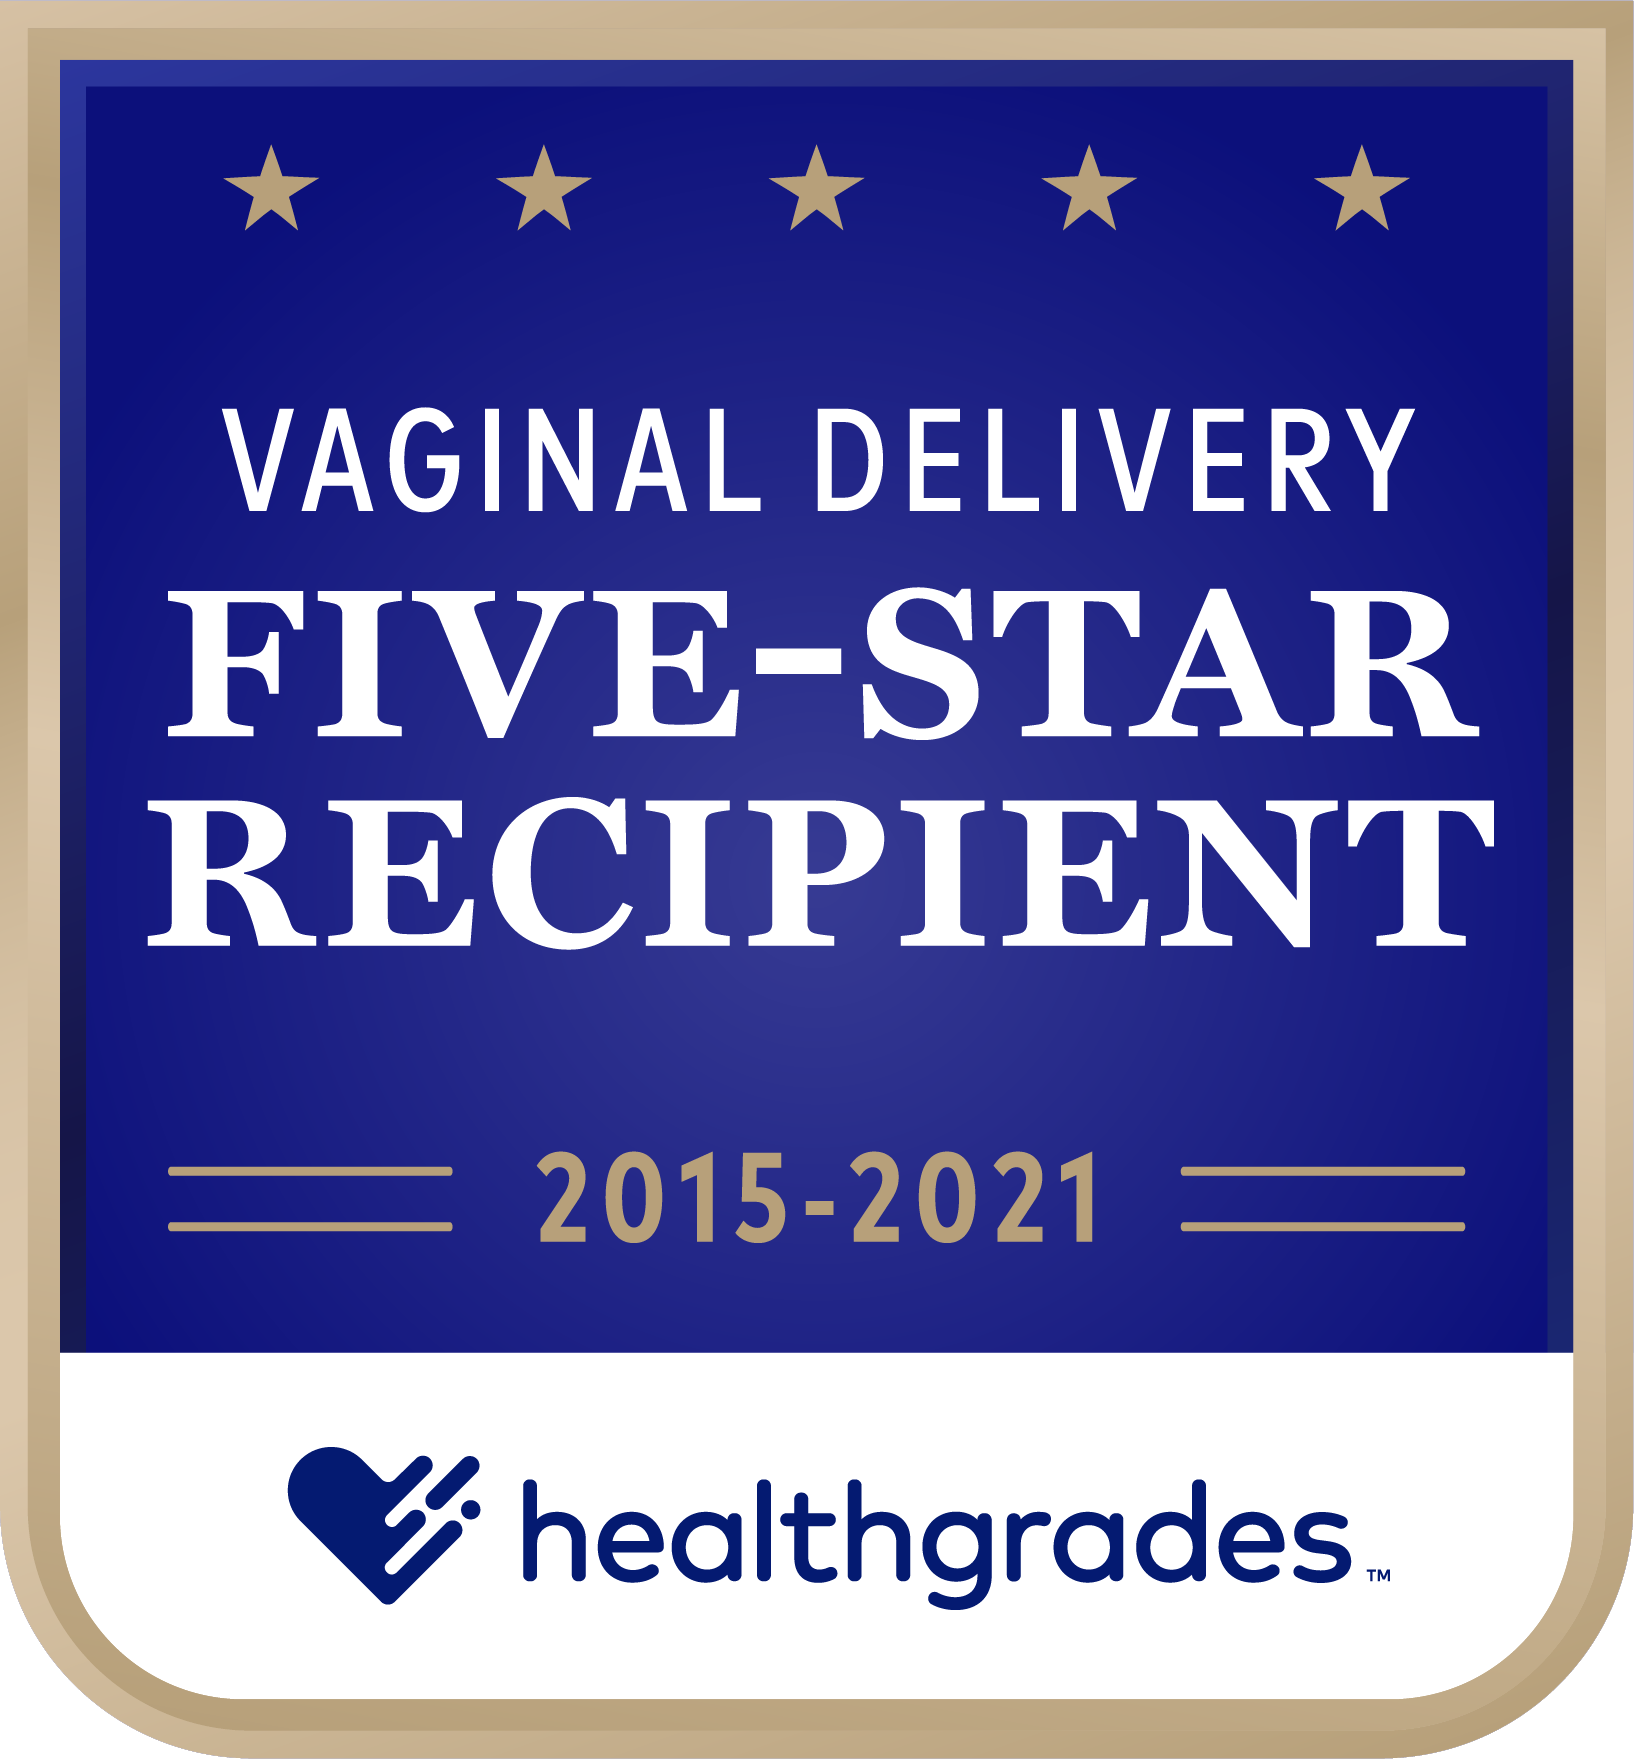 Five-Star Recipient for Vaginal Delivery for 7 Years in a Row (2015-2021)